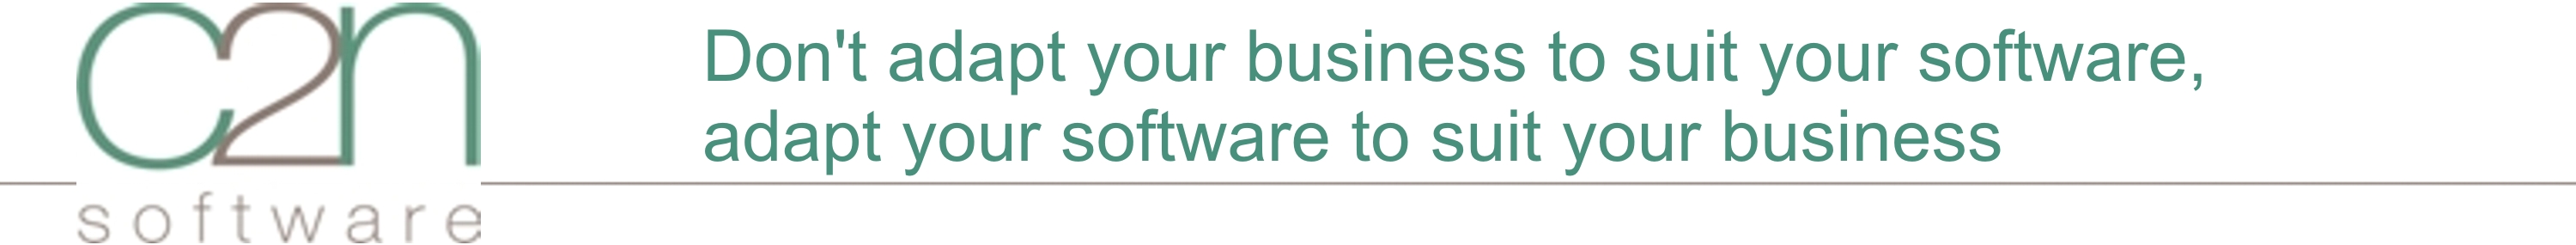 Dont adapt your business to suit your software, adapt your software to suit your business